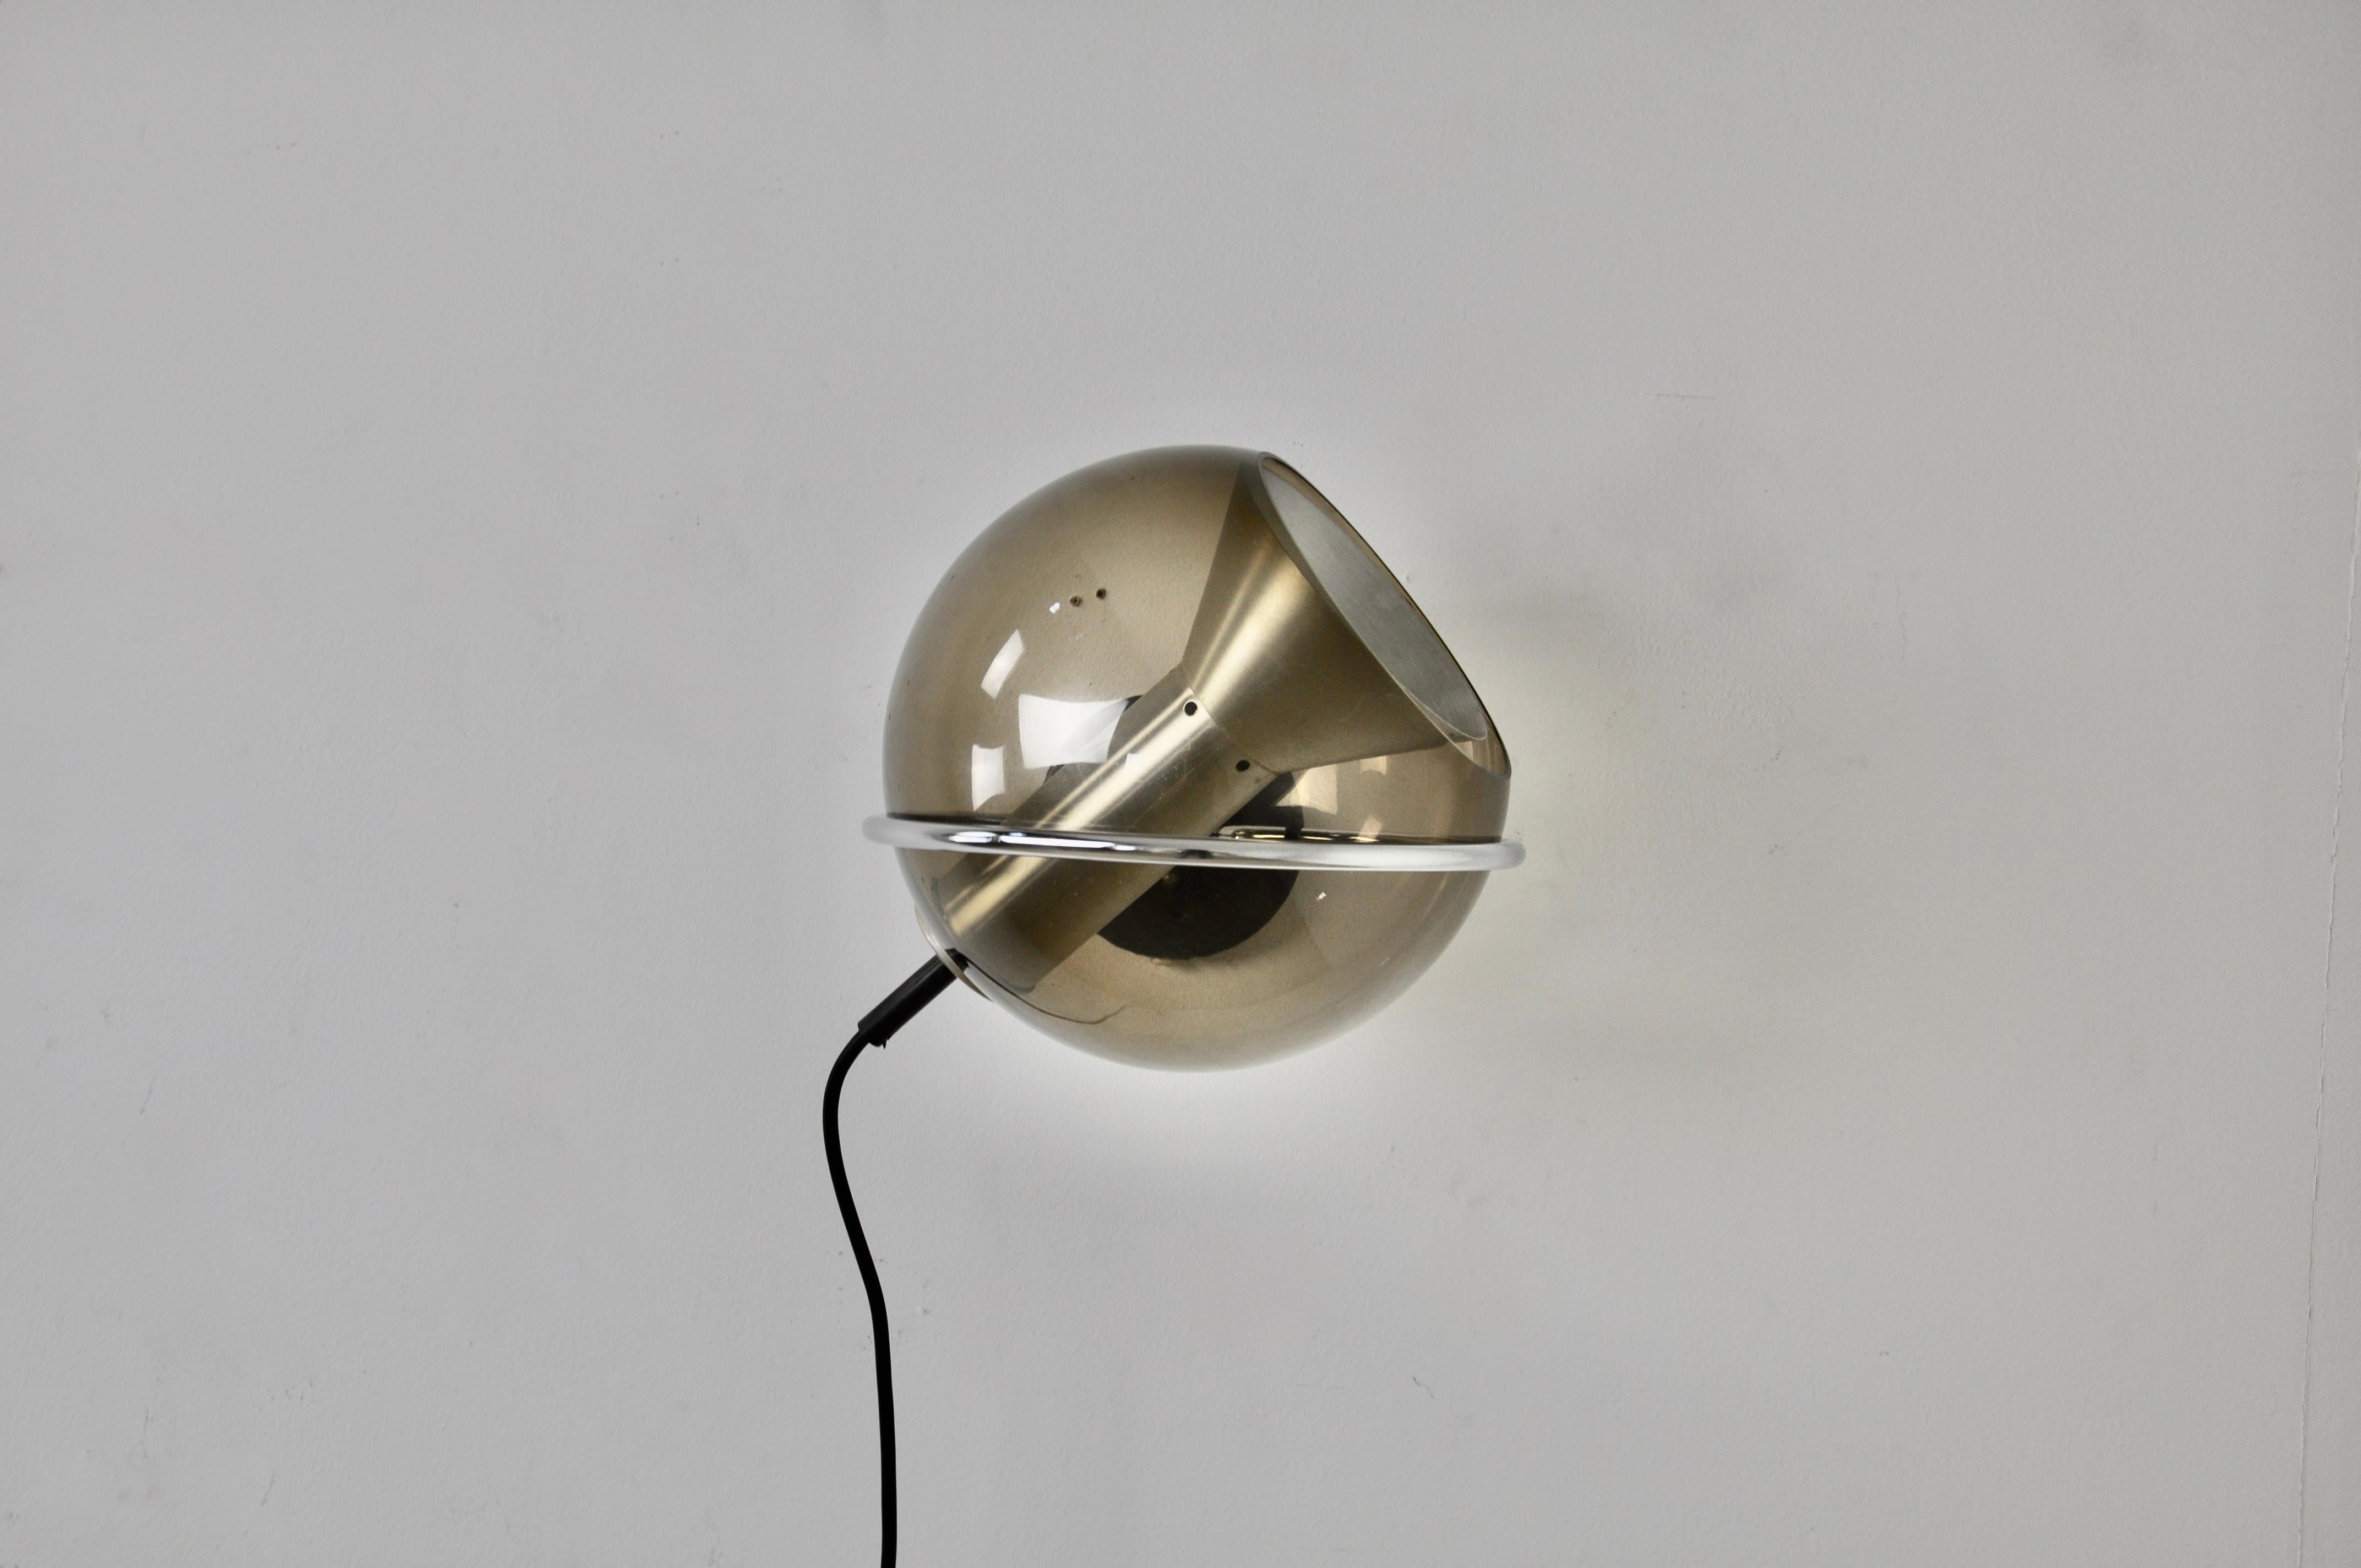 Wall lamp in glass and aluminum. The wall lamp is orientable. Wear due to time and age of the wall lamp.